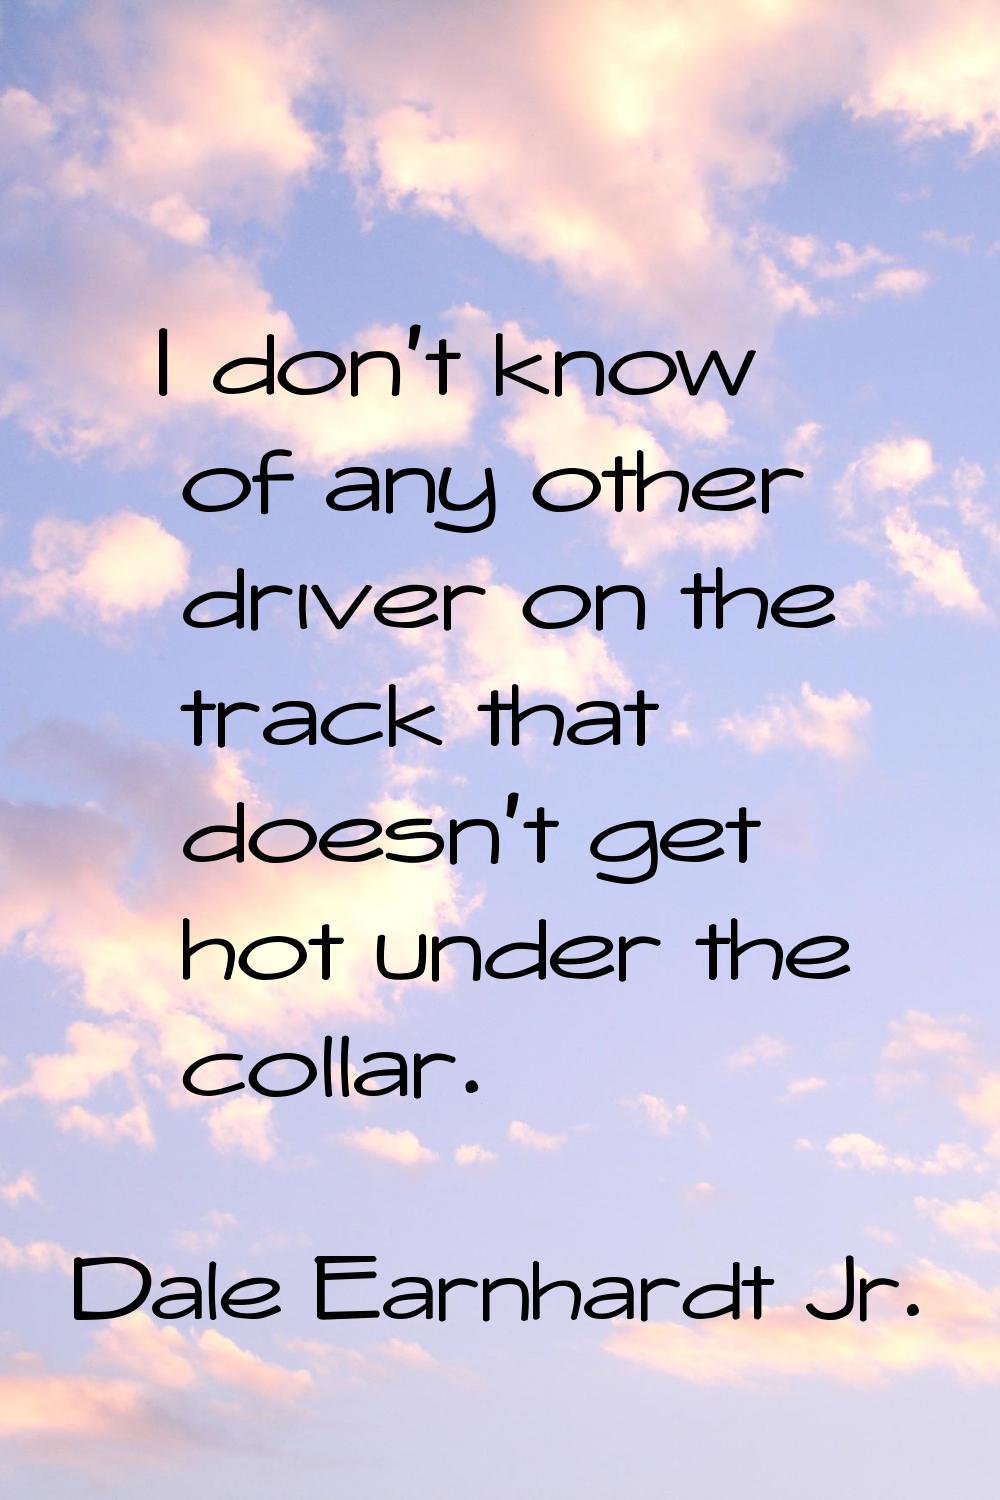 I don't know of any other driver on the track that doesn't get hot under the collar.